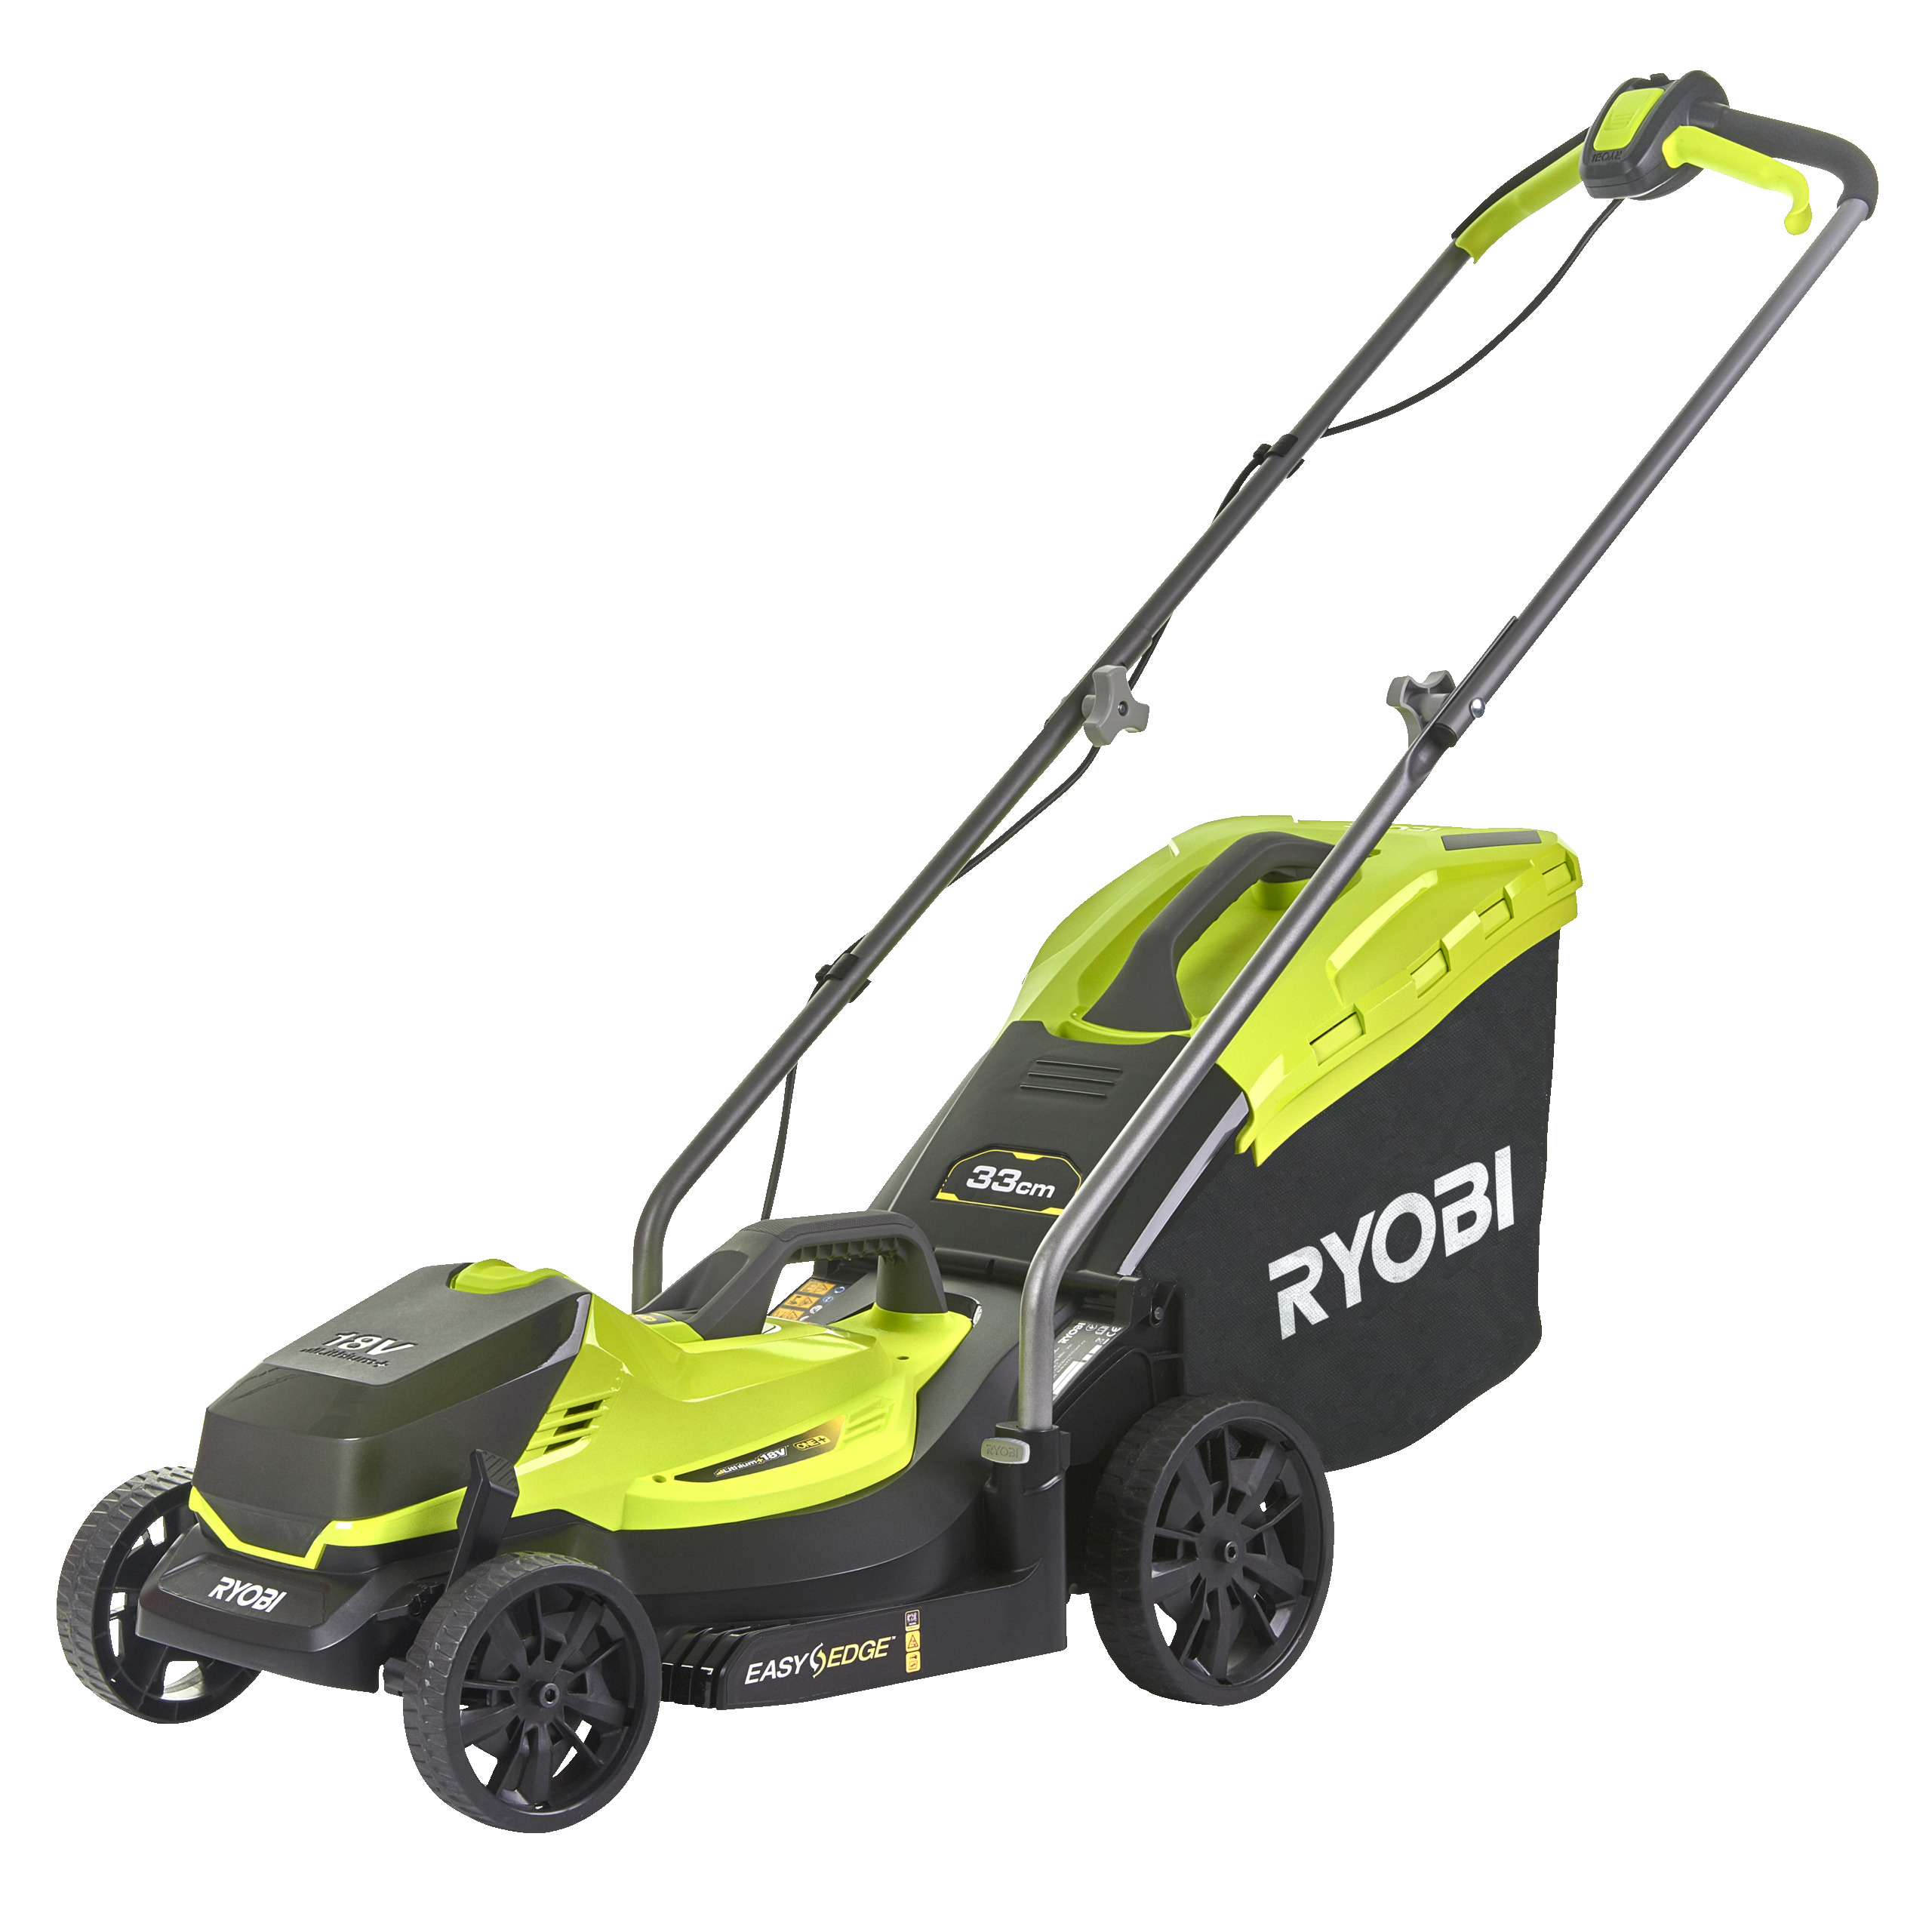 18V ONE+™ 33cm Cordless Lawn Mower (Bare Tool)_snippet_video_1